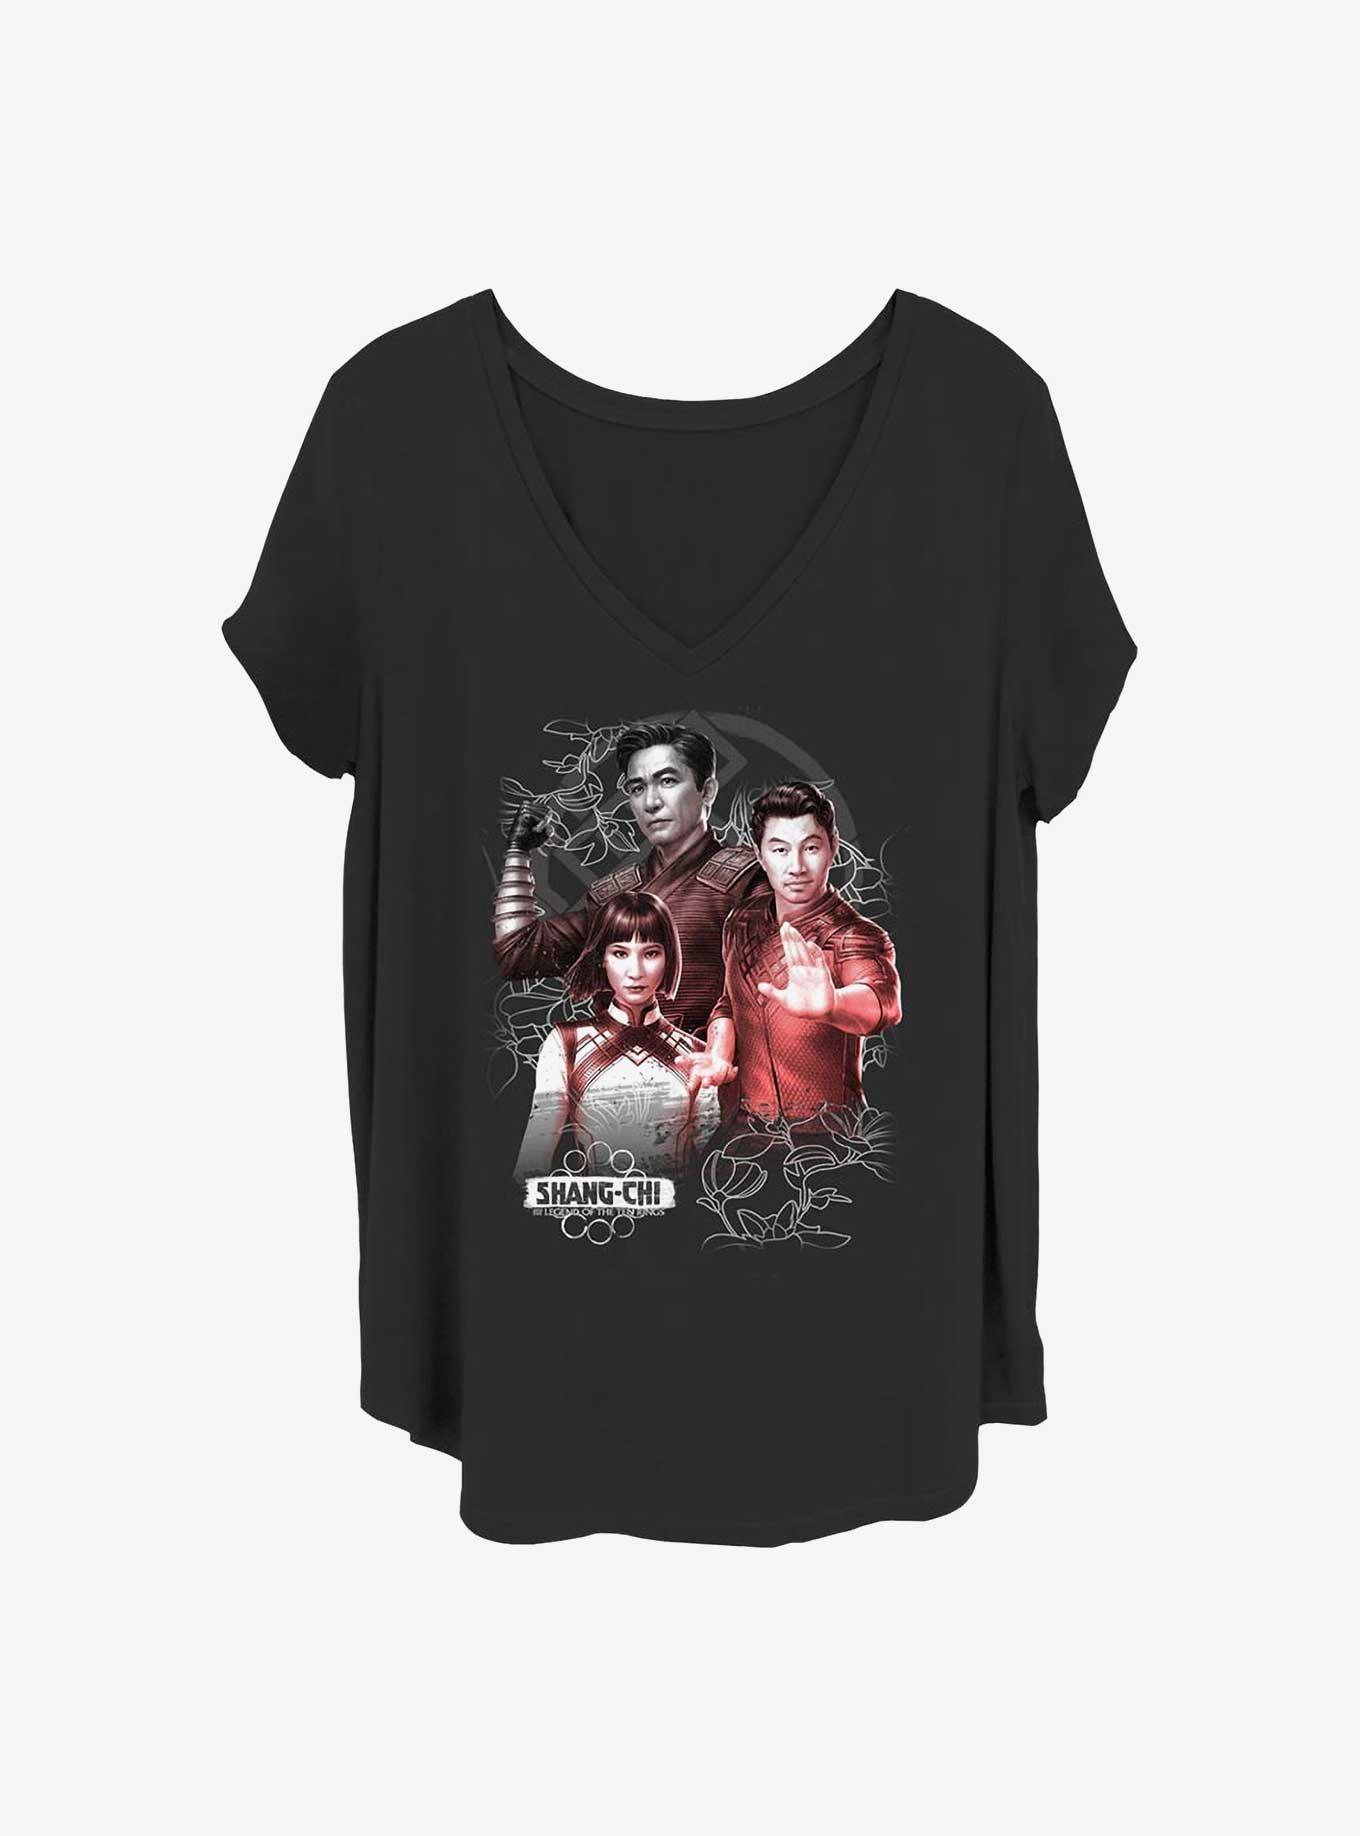 Marvel Shang-Chi and the Legend of the Ten Rings Family Matters Girls T-Shirt Plus Size, BLACK, hi-res